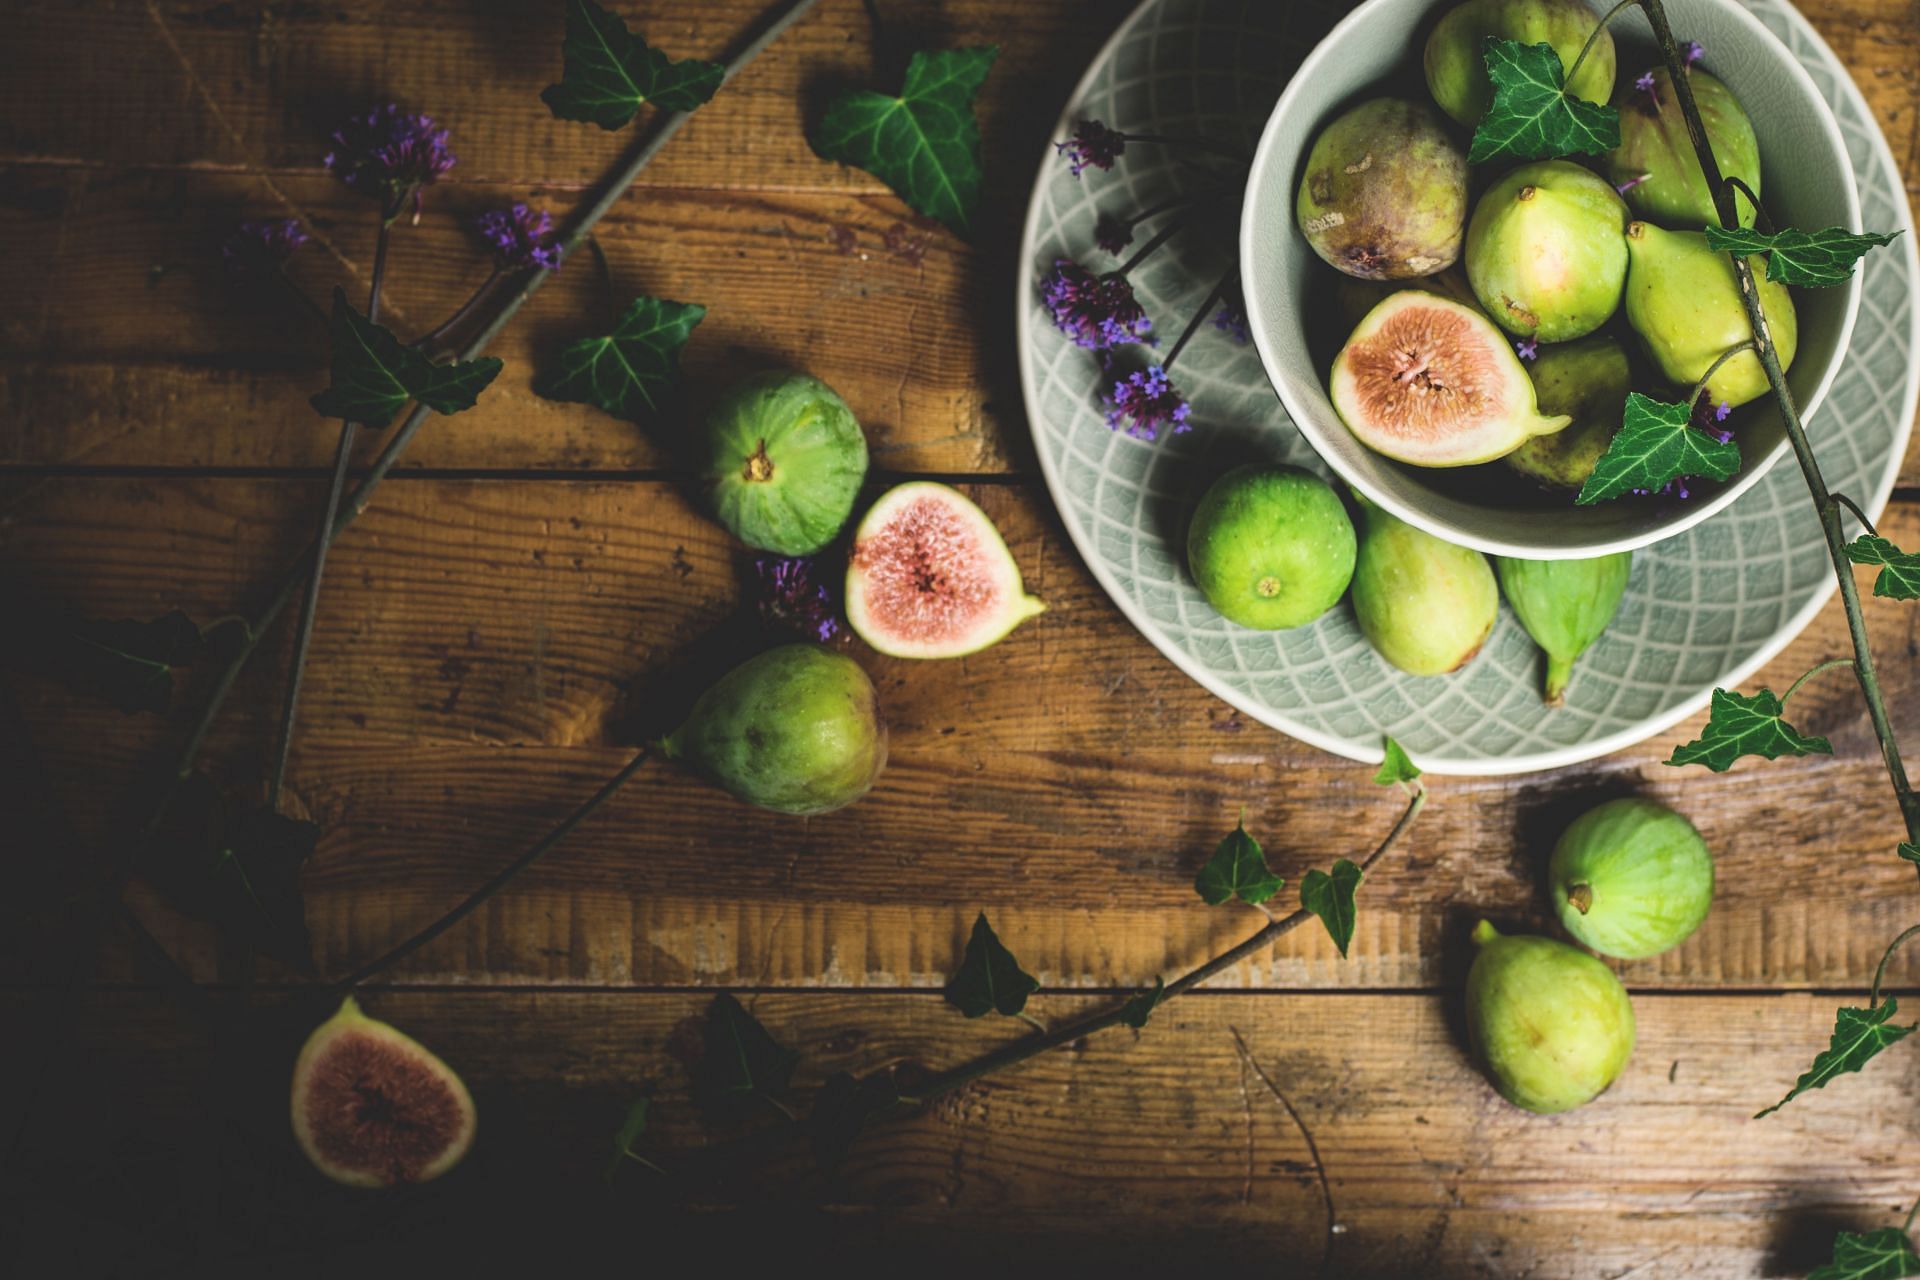 There are many different varieties of figs, two of which are green and purple varieties. (Image via Pexels/Lumn)